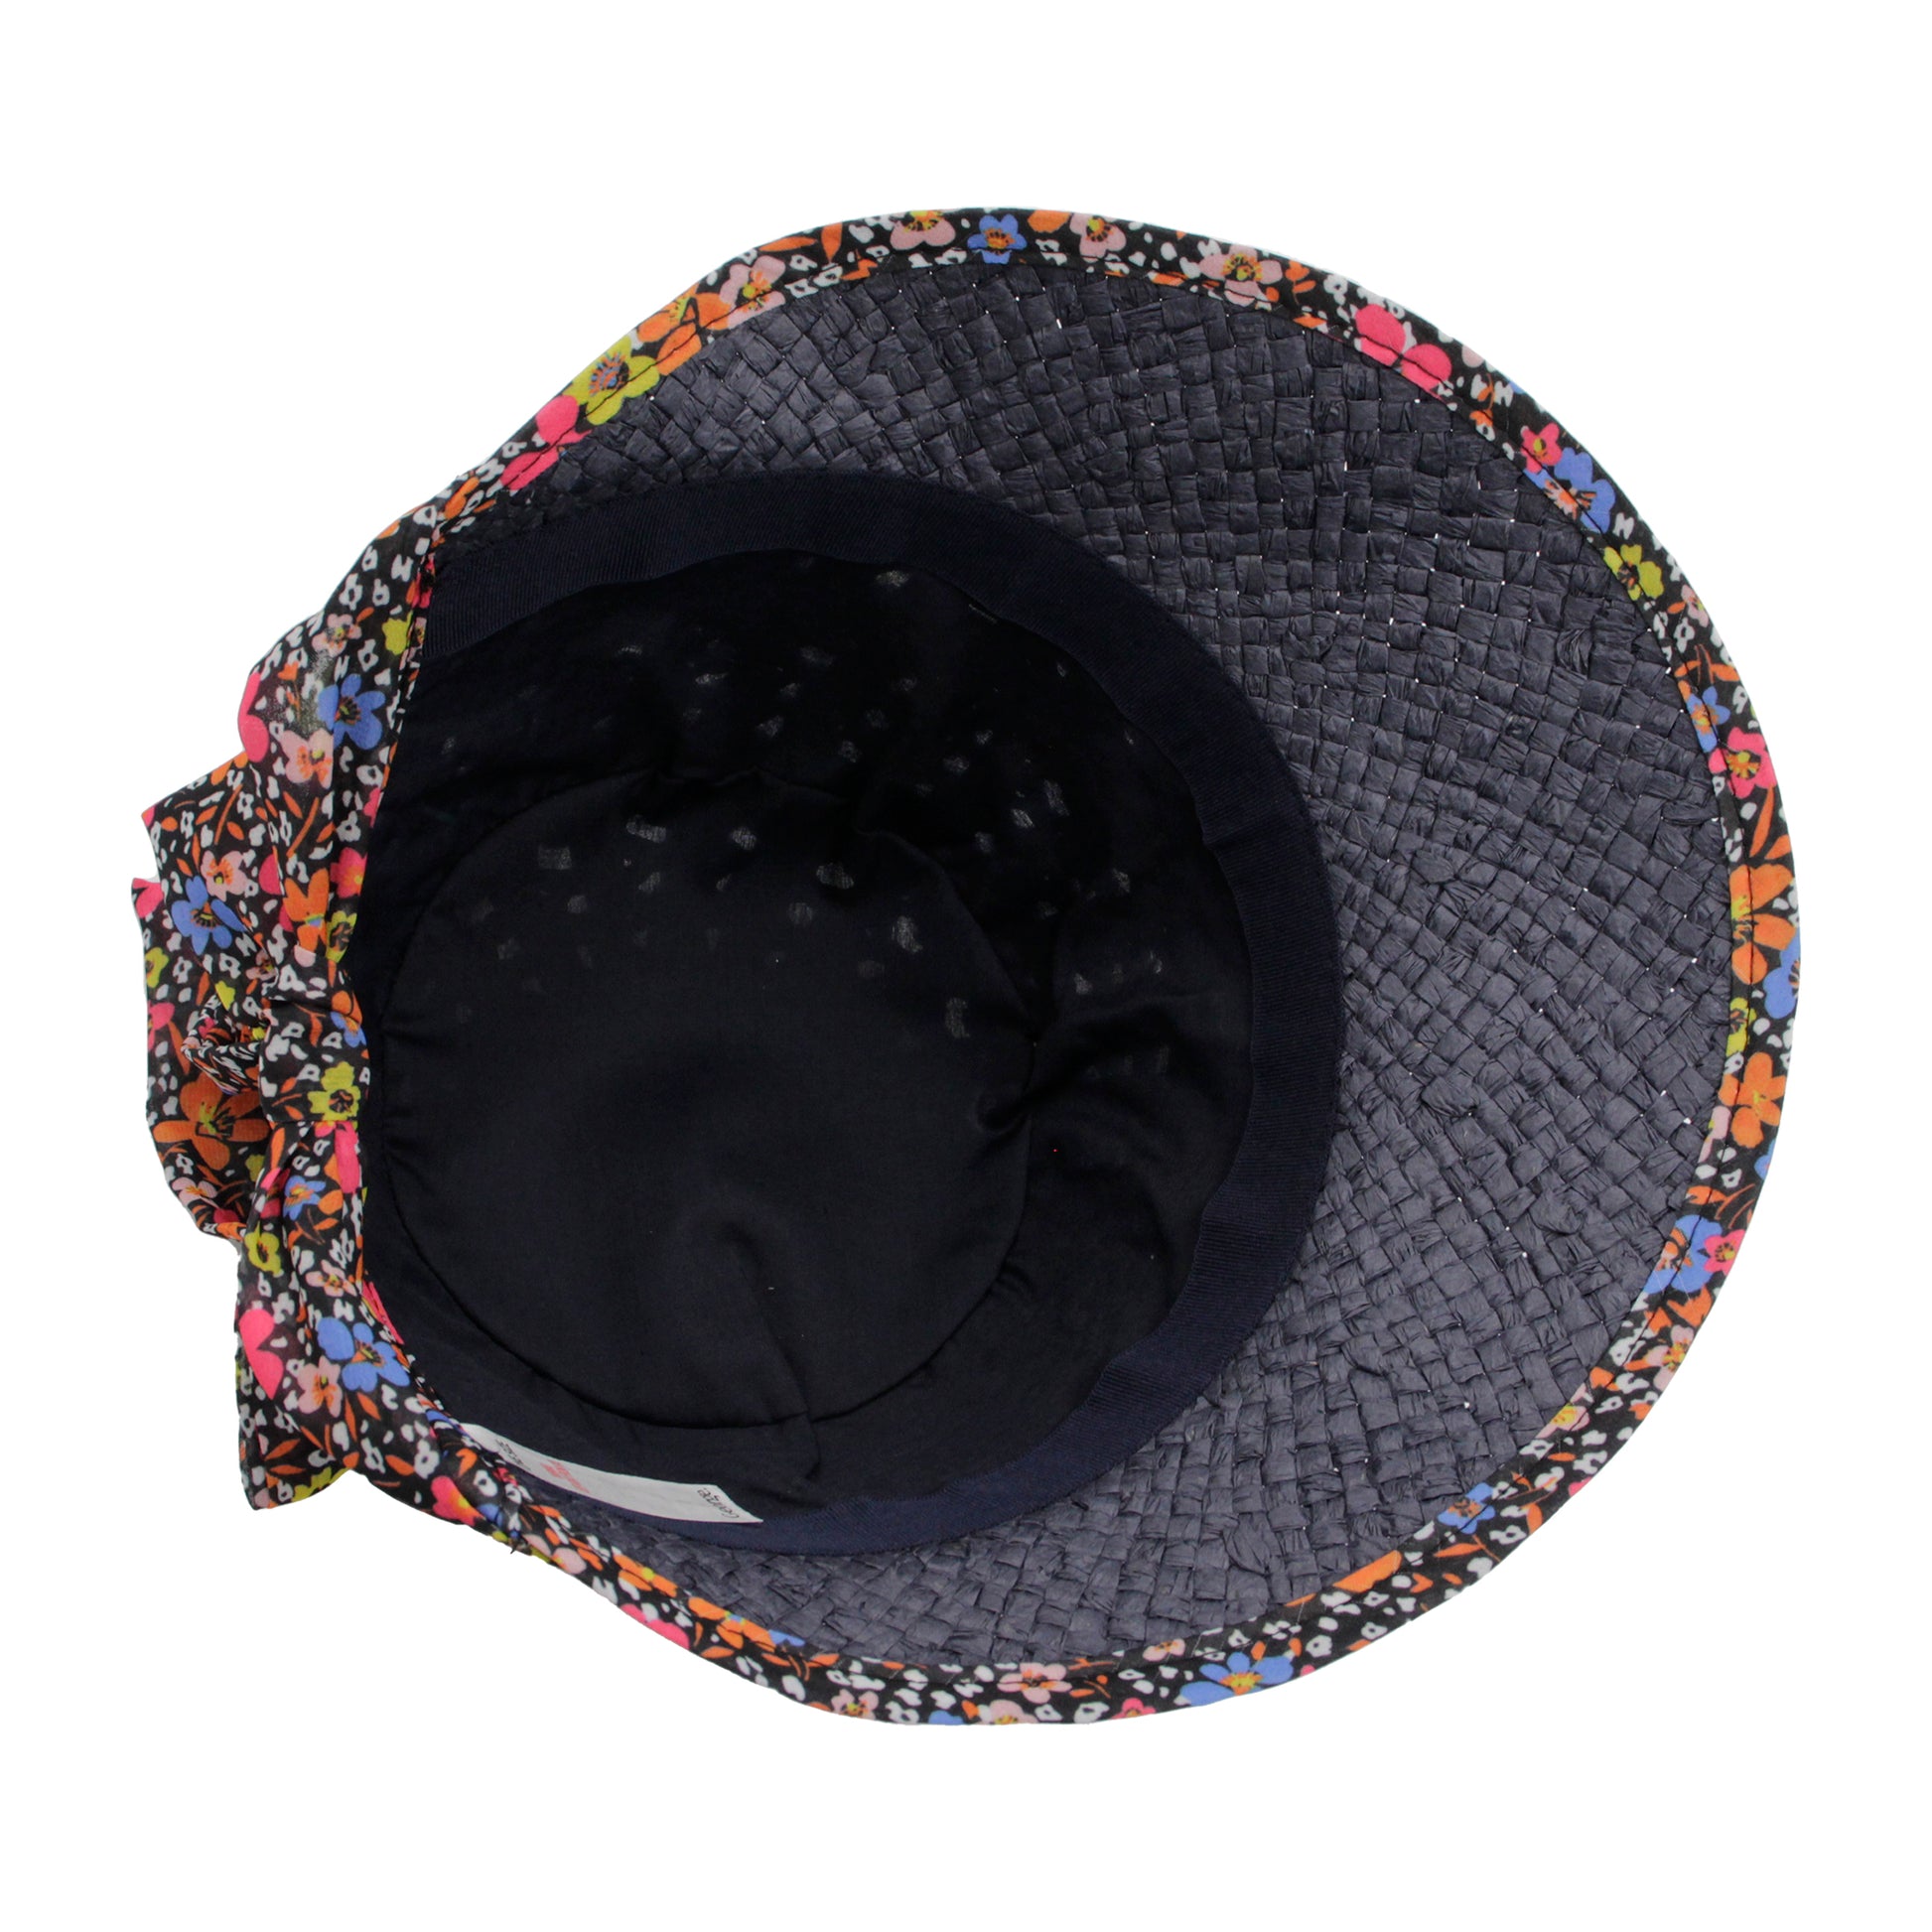 Boho Floral Black Sun Hat Hollow Out Crochet Wide Brim Straw Hats Summer UV Protection Travel Beach Hats For Women - ACCEHUT